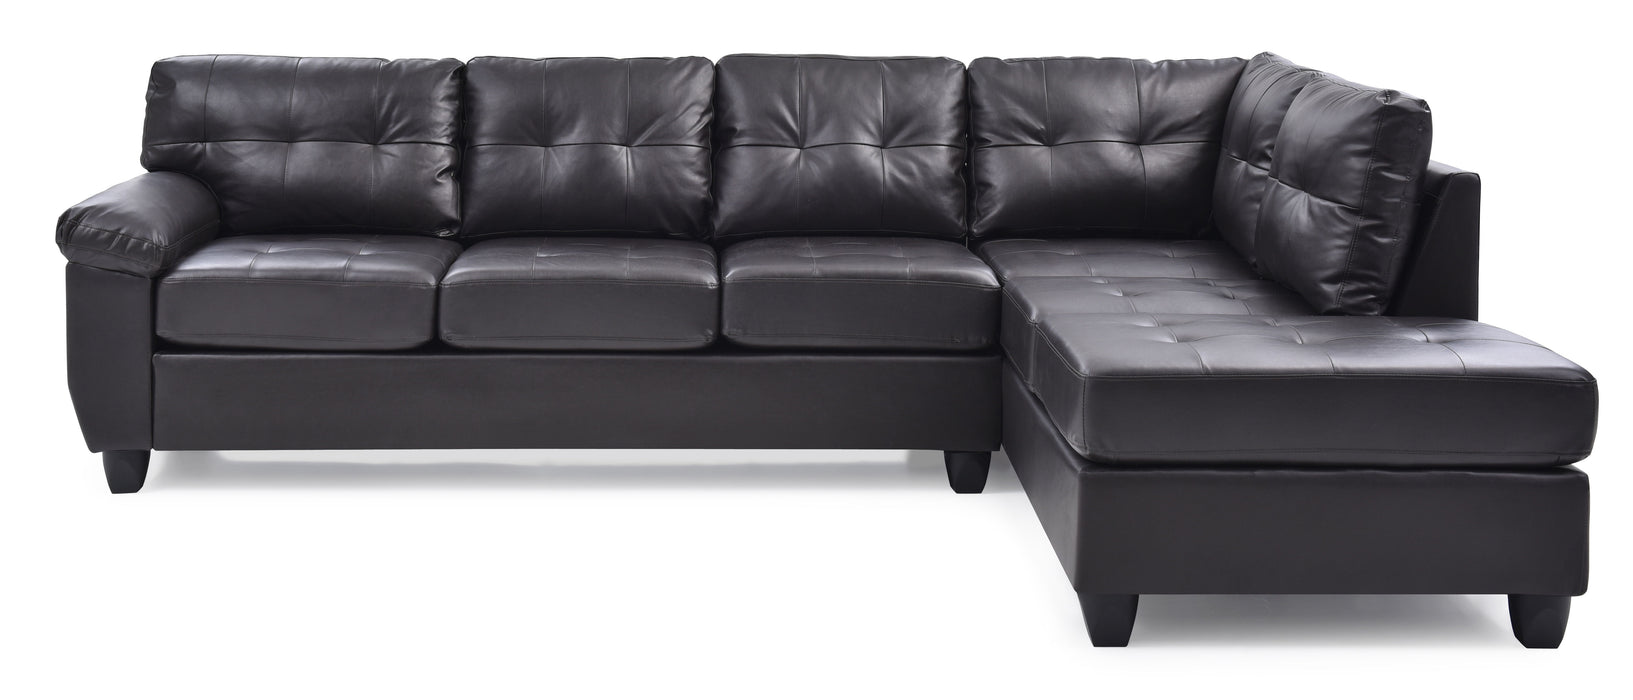 Glory Furniture Gallant Sectional, Cappuccino